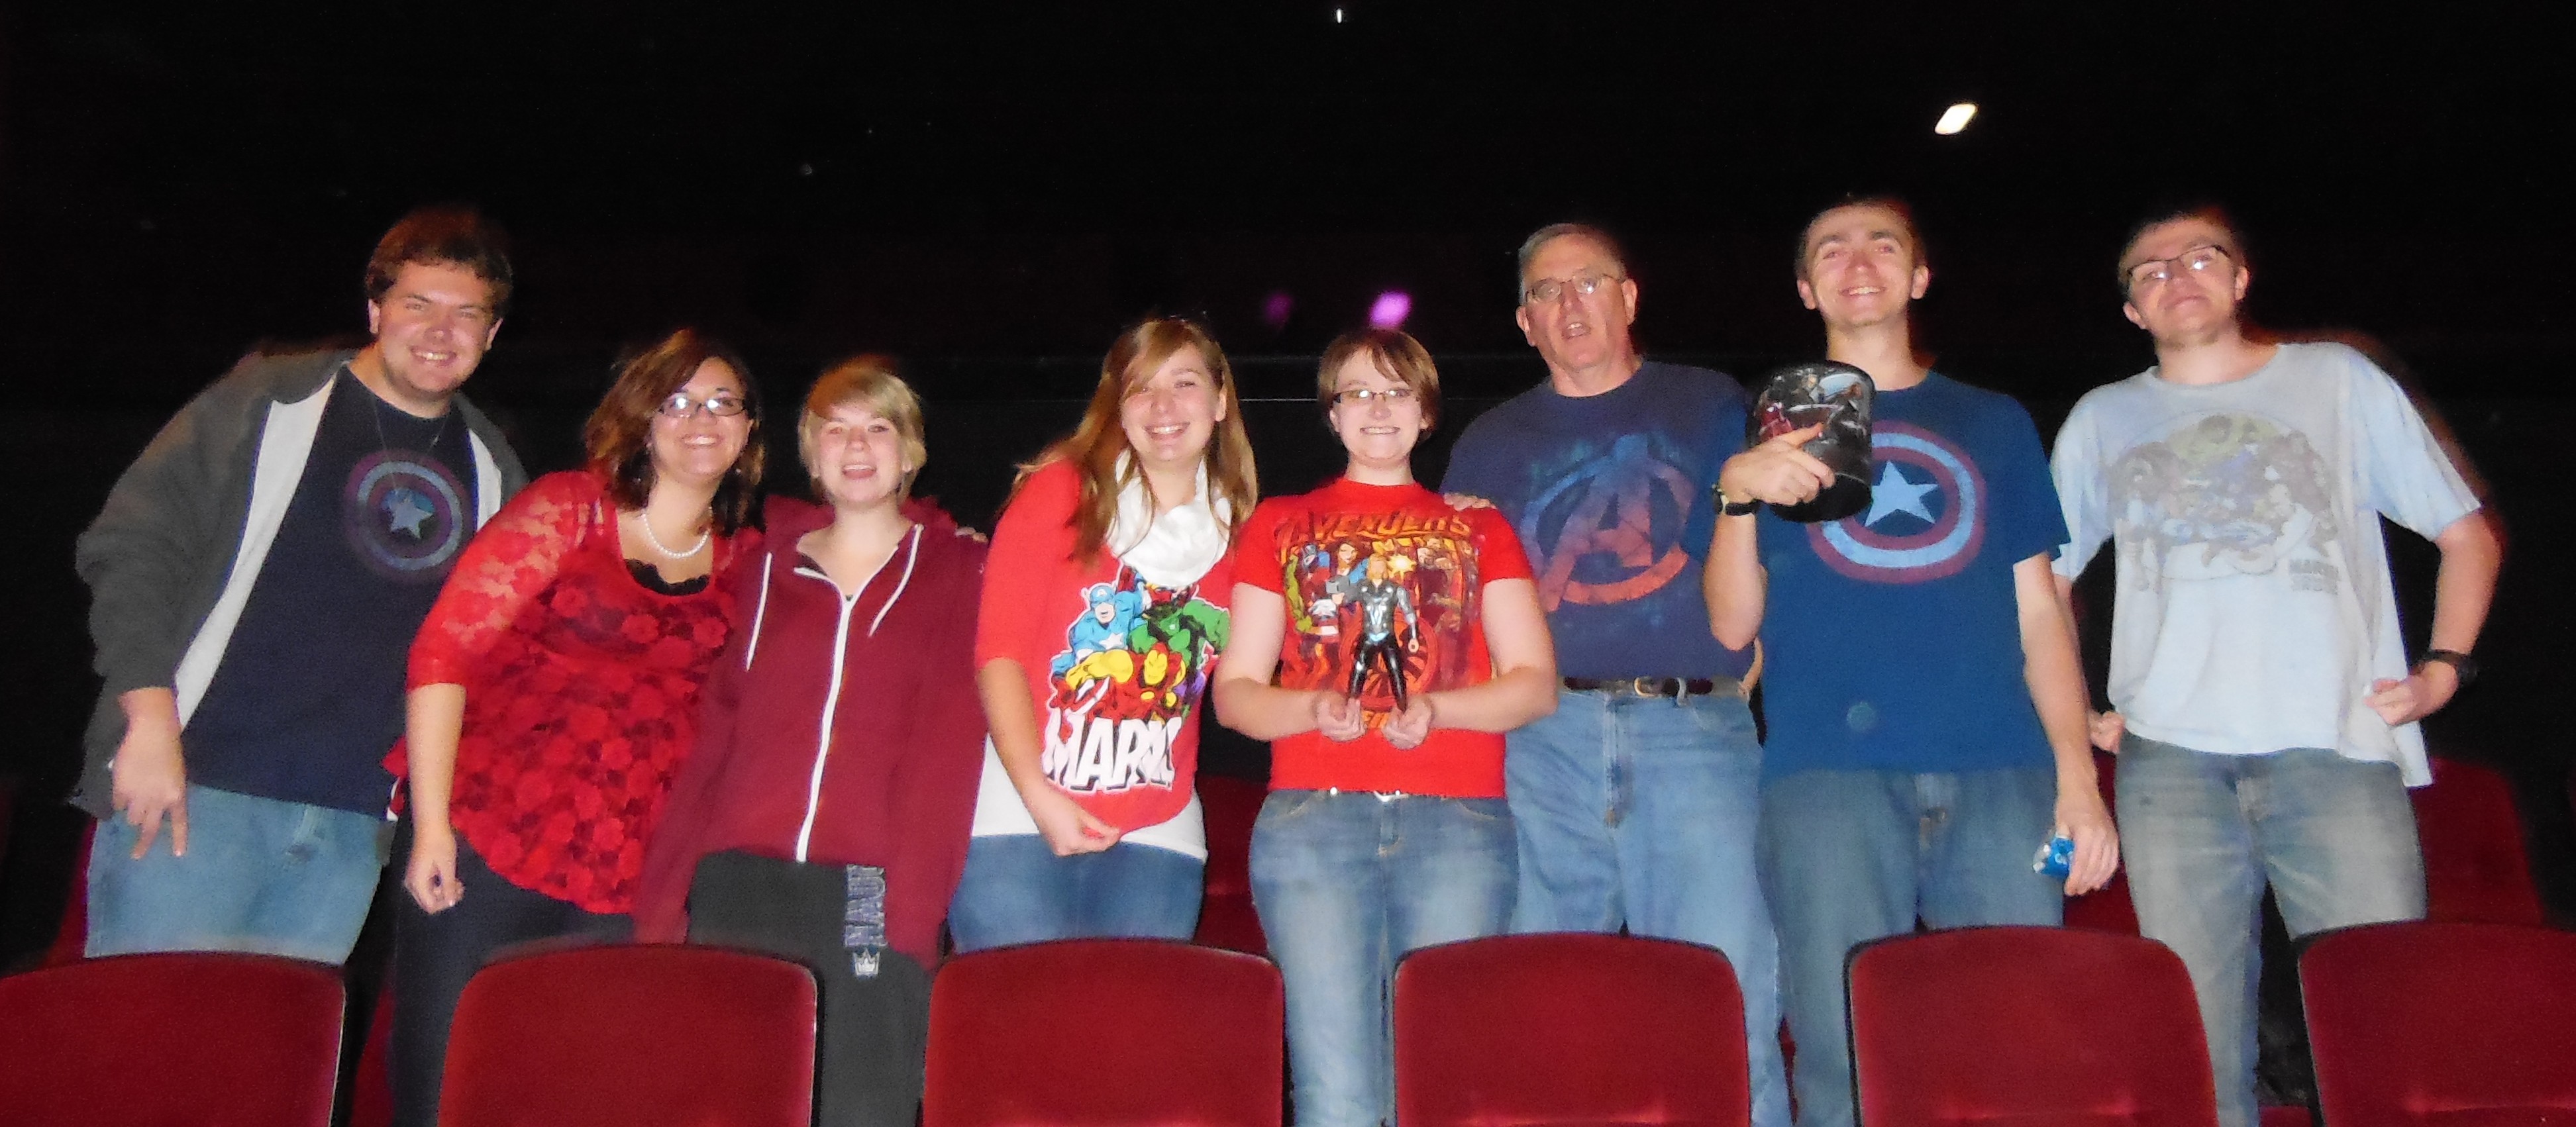 Note all the Marvel T-shirts, plus a Thor doll, and an Avengers popcorn bucket. Yes, we come prepared!